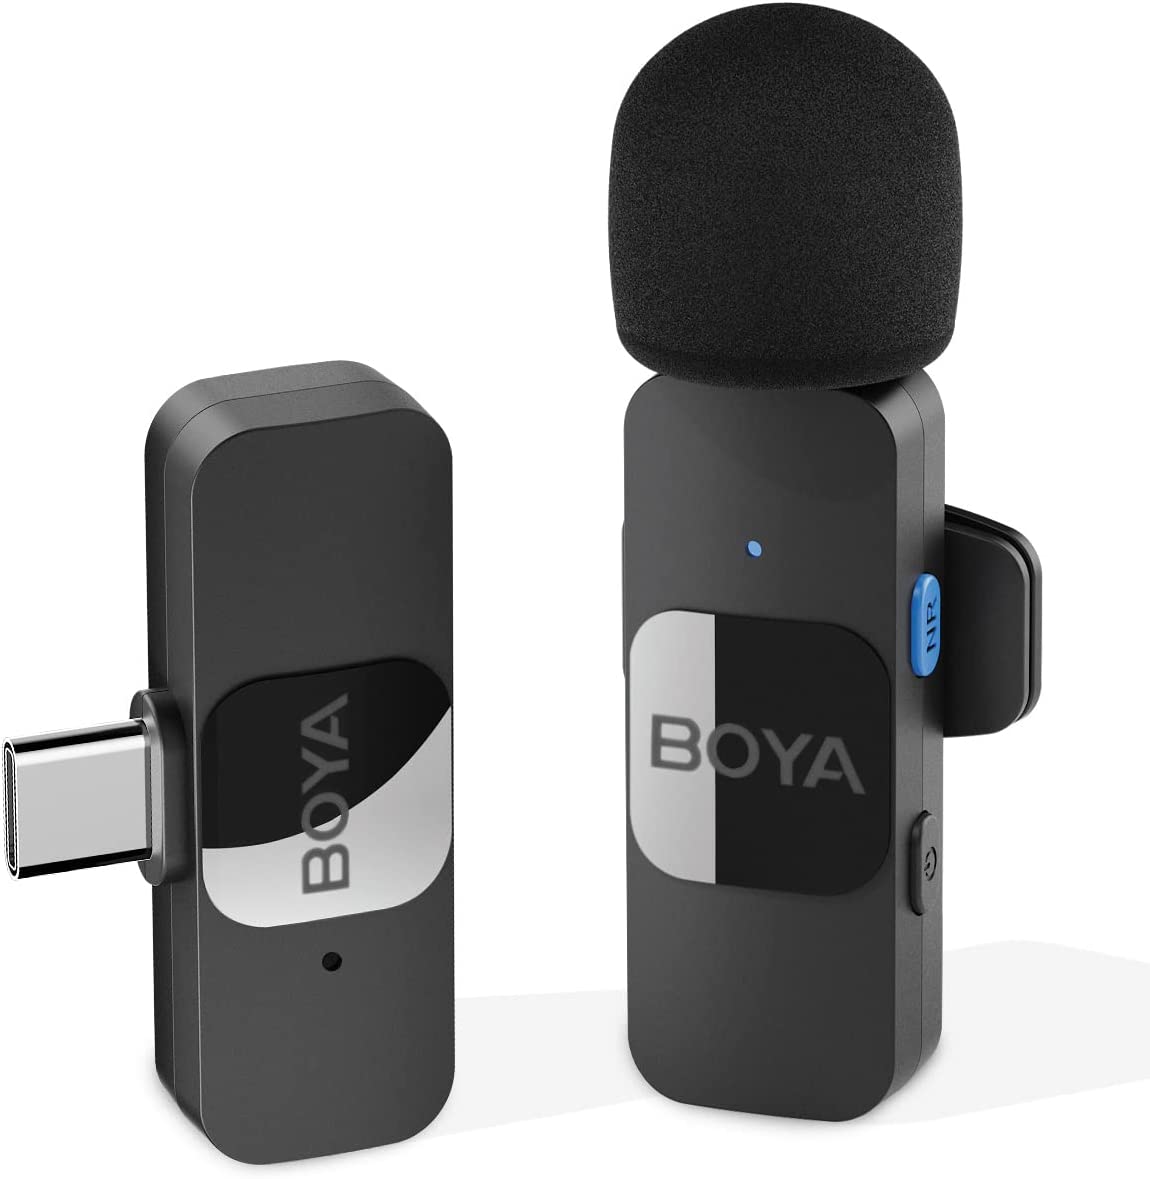 BOYA BY-V10 USB-C Wireless Microphone,Mini Lapel Mic with Noise Cancelling Compatibale with Android/Type-C Smartphone Laptop for YouTube Podcast Facebook Vlogging Recording